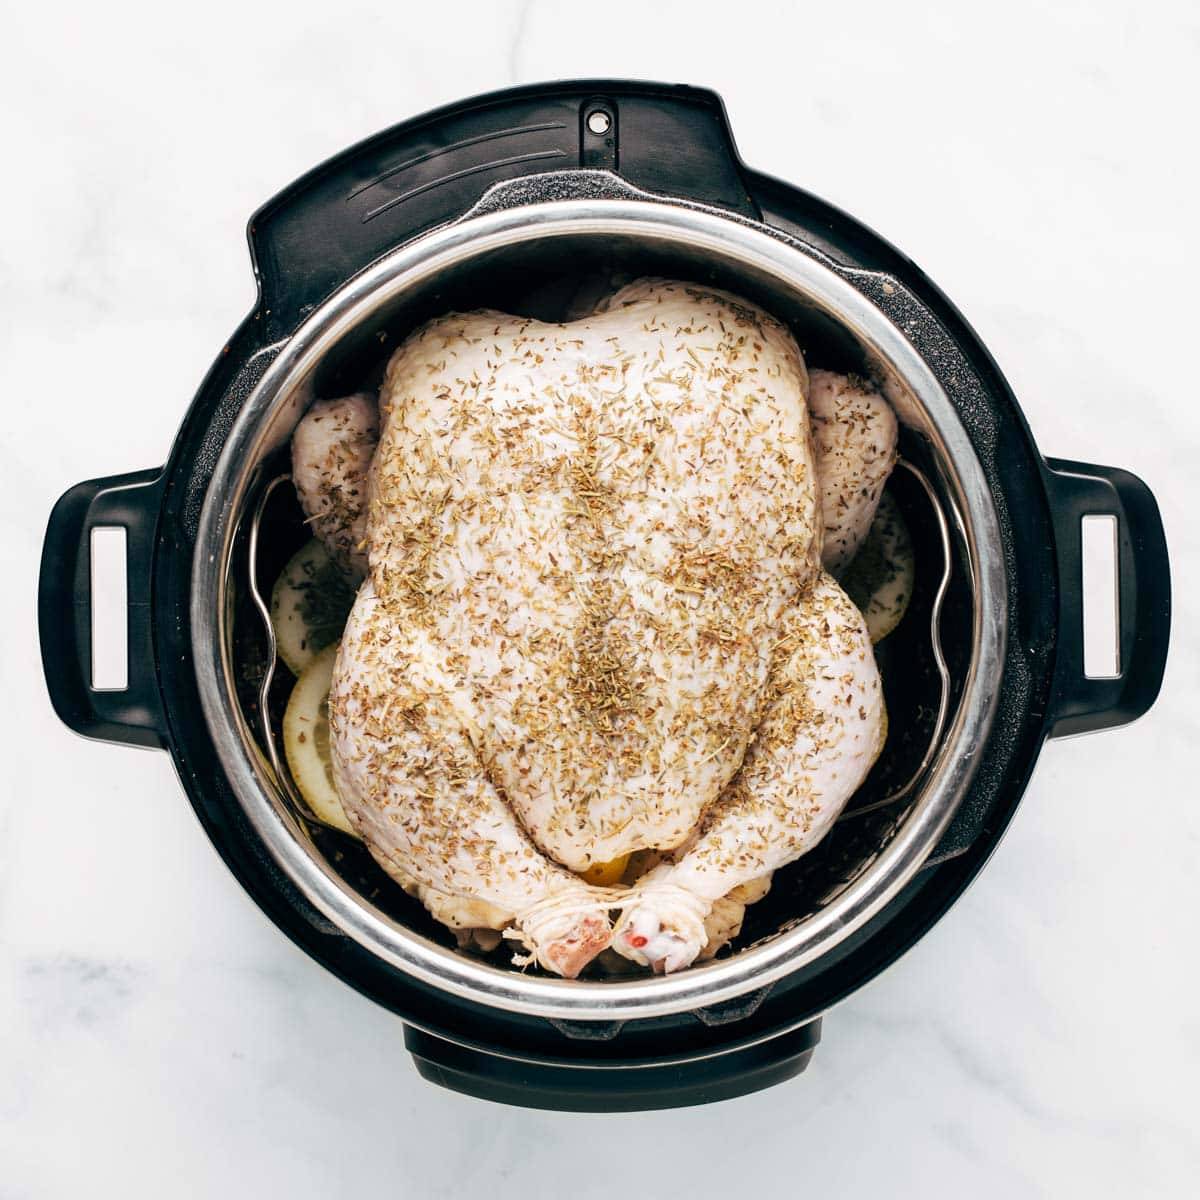 Raw whole chicken in the Instant Pot.